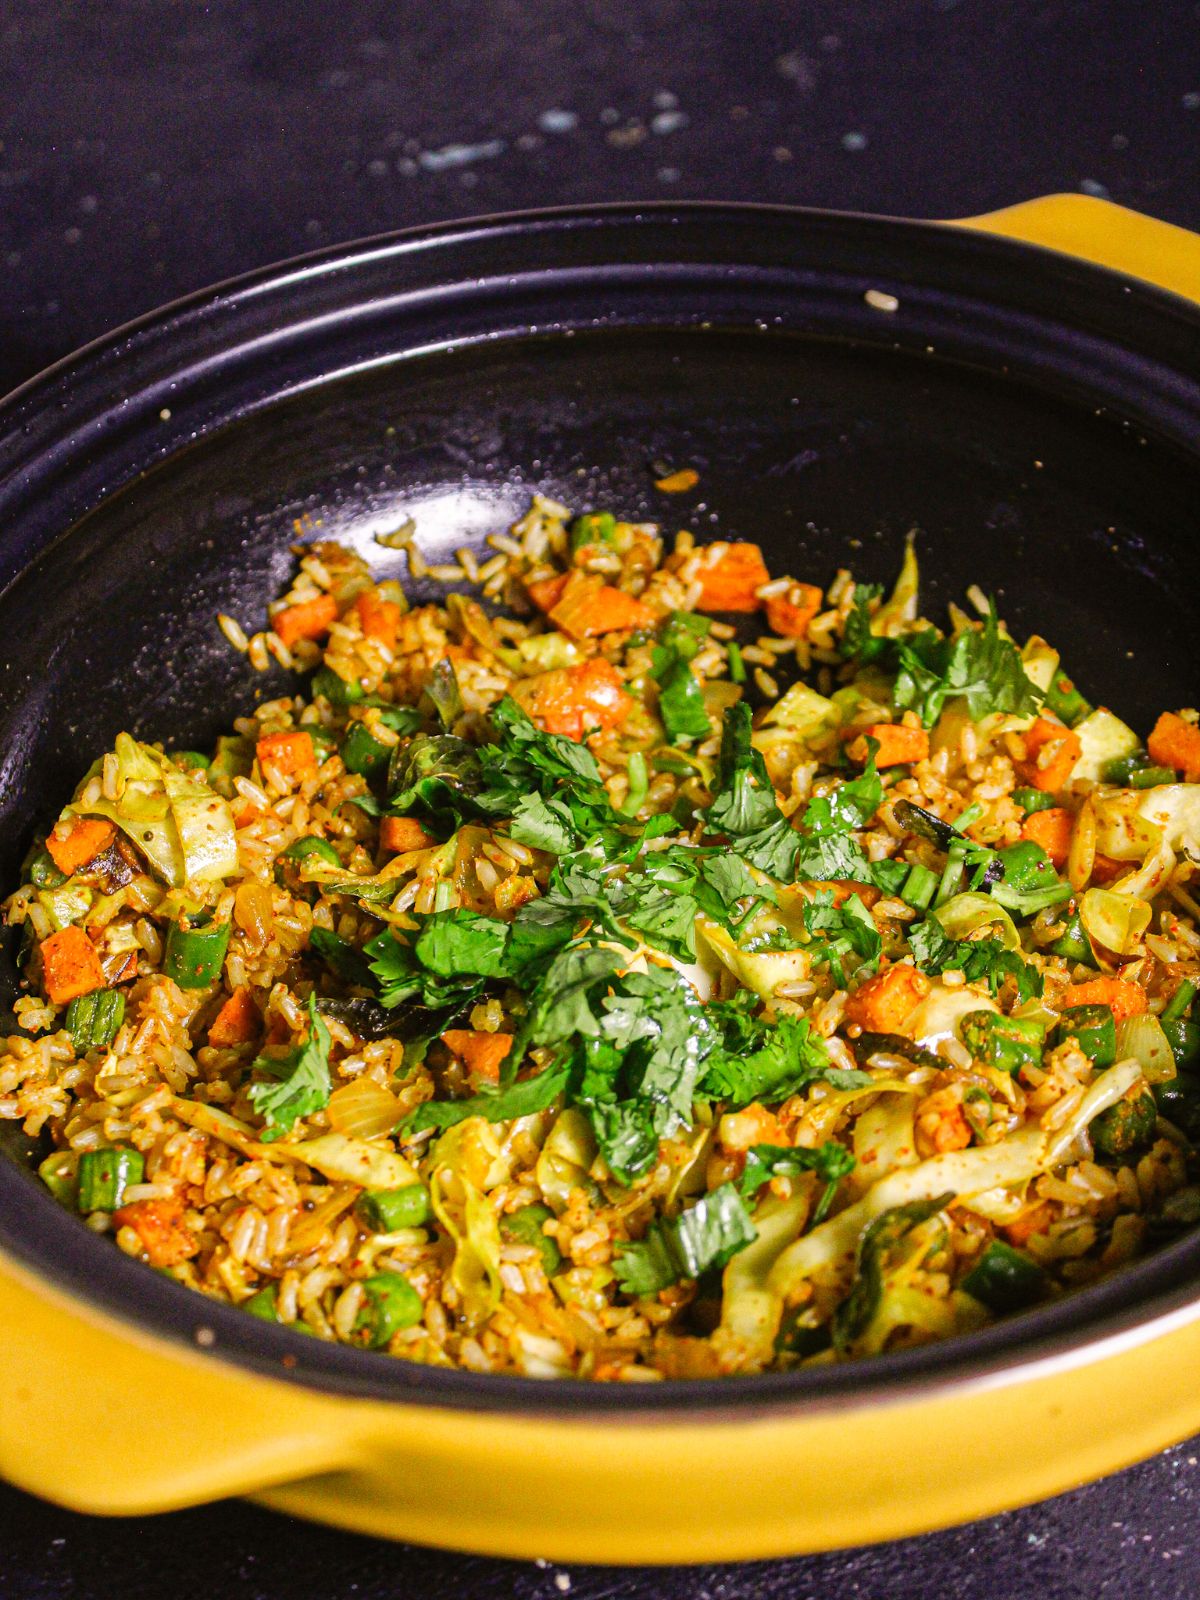 Garnish the rice with fresh coriander leaves and serve hot 